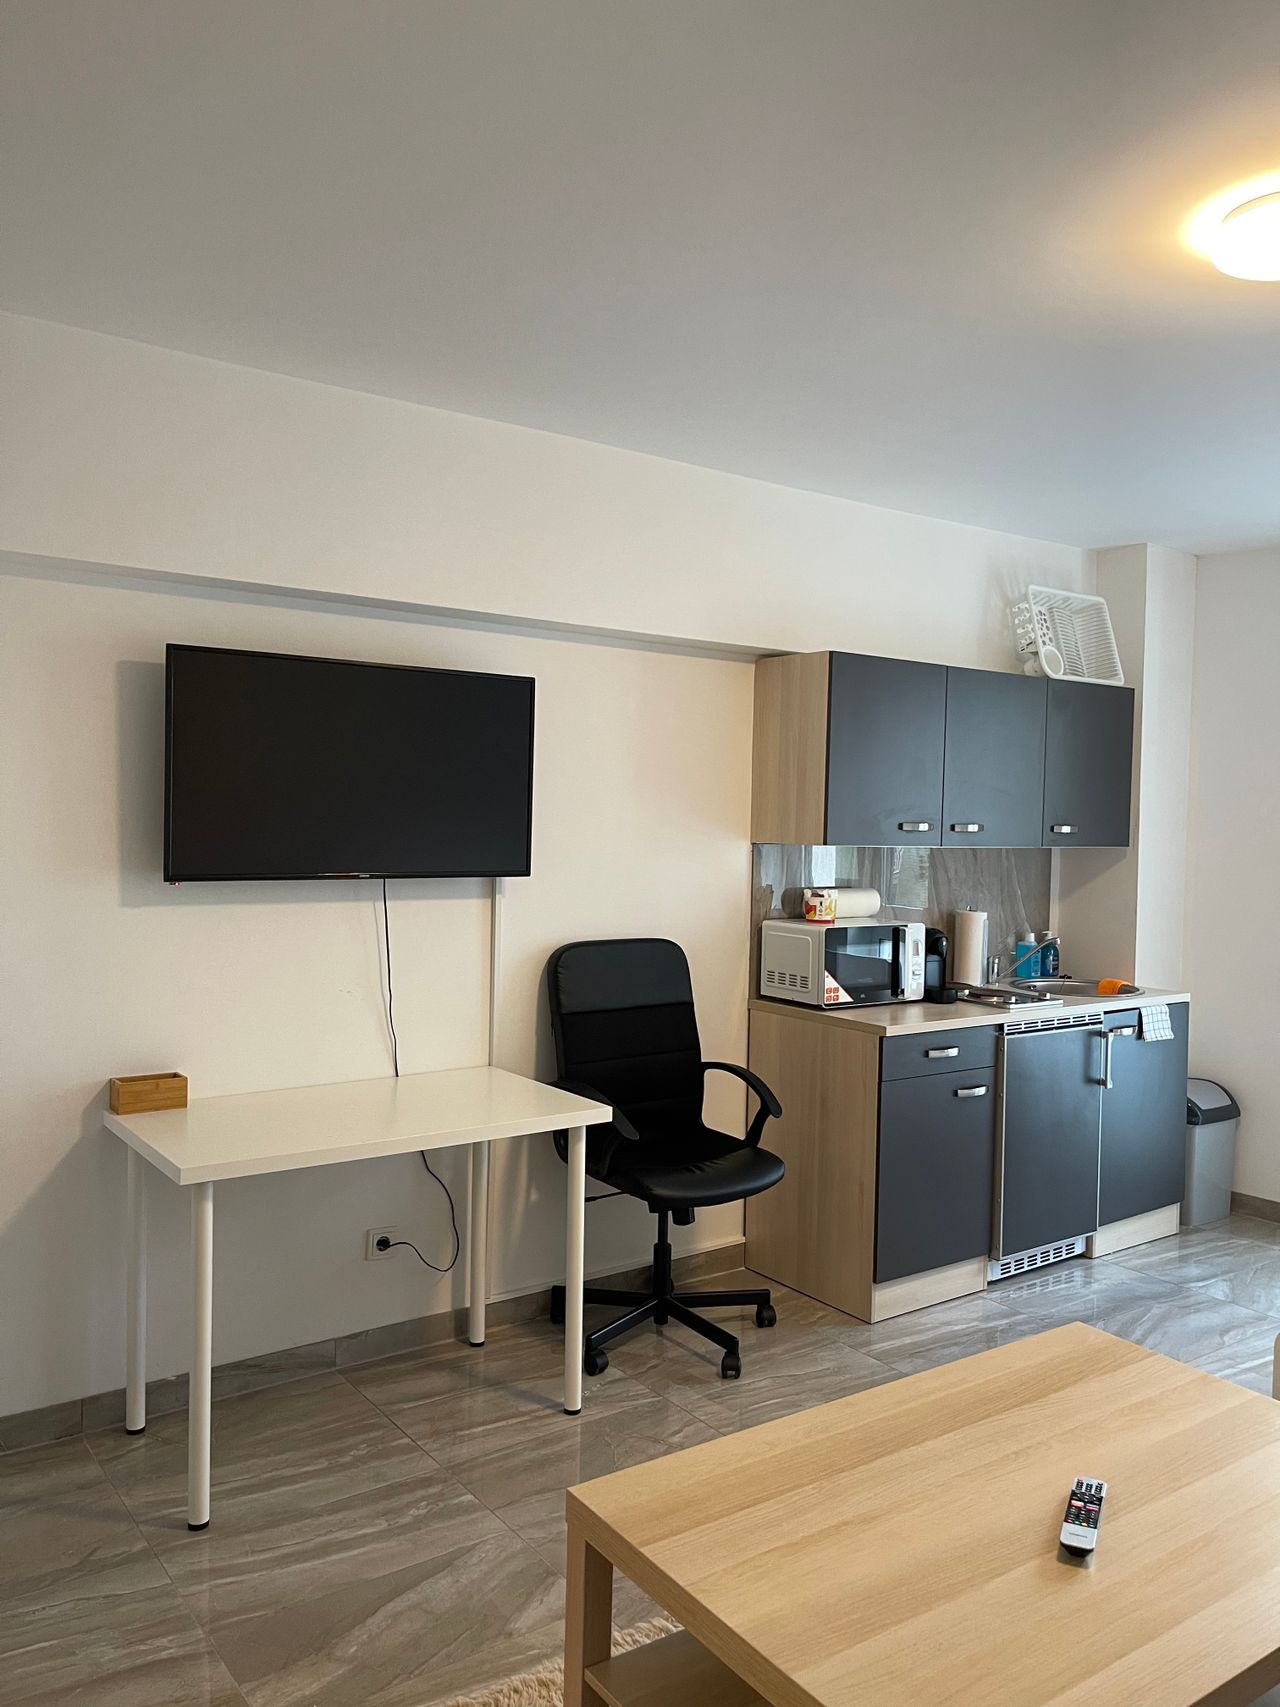 31m² - 200M COLOGNE STATION - CENTRAL - FULL SERVICED - KITCHEN - BATH - WASHING MACHINE - HIGHSPEED-WIFI